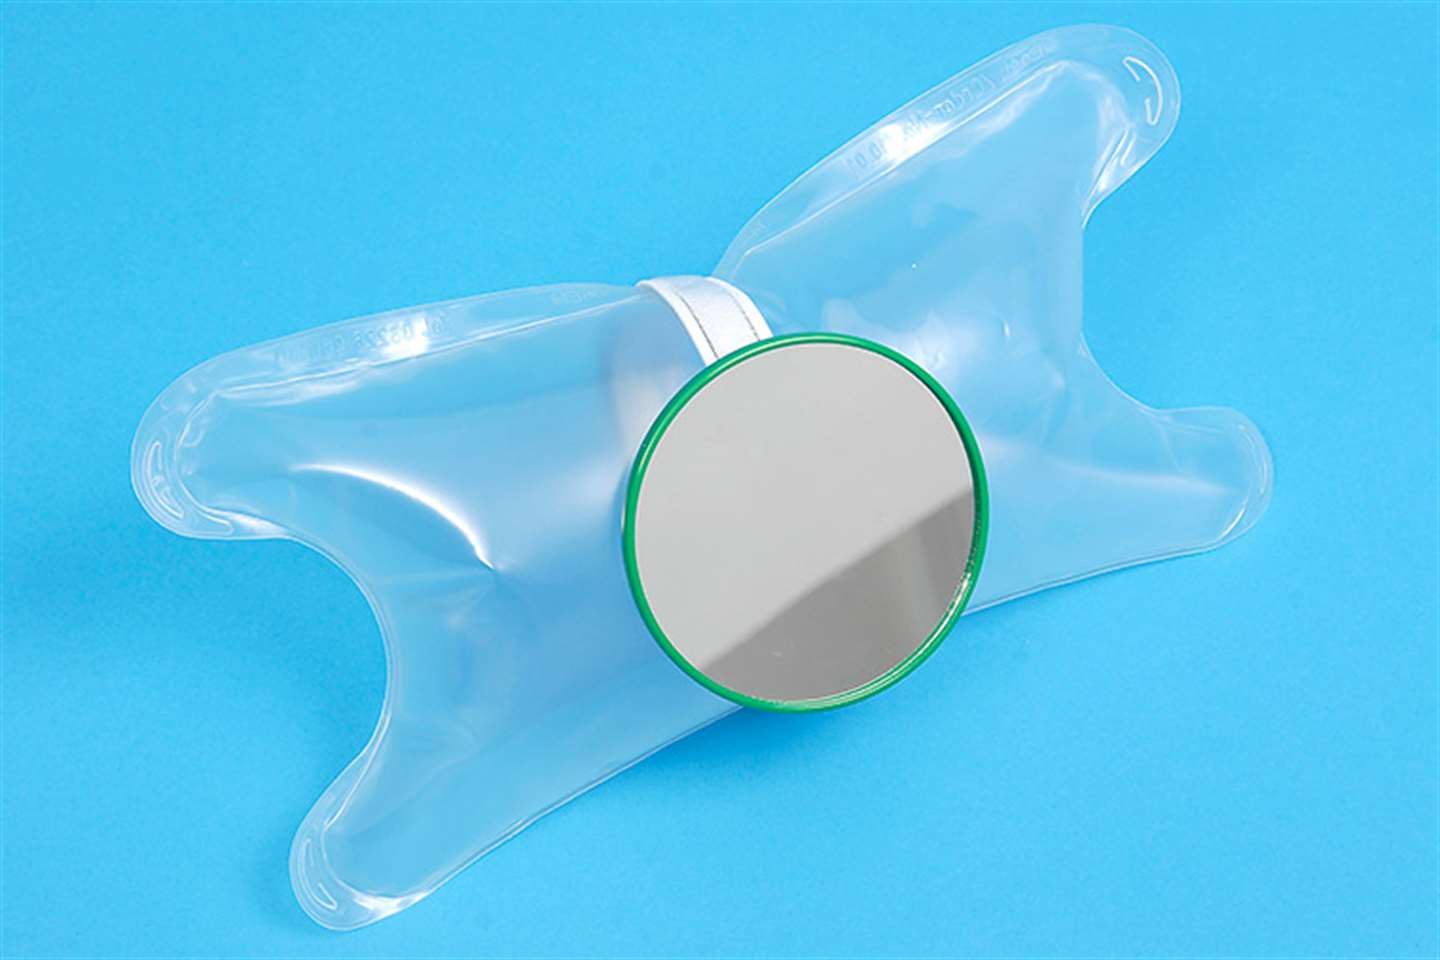 Inflatable leg divider with mirror attached for ease of intermittent self-catheterisation